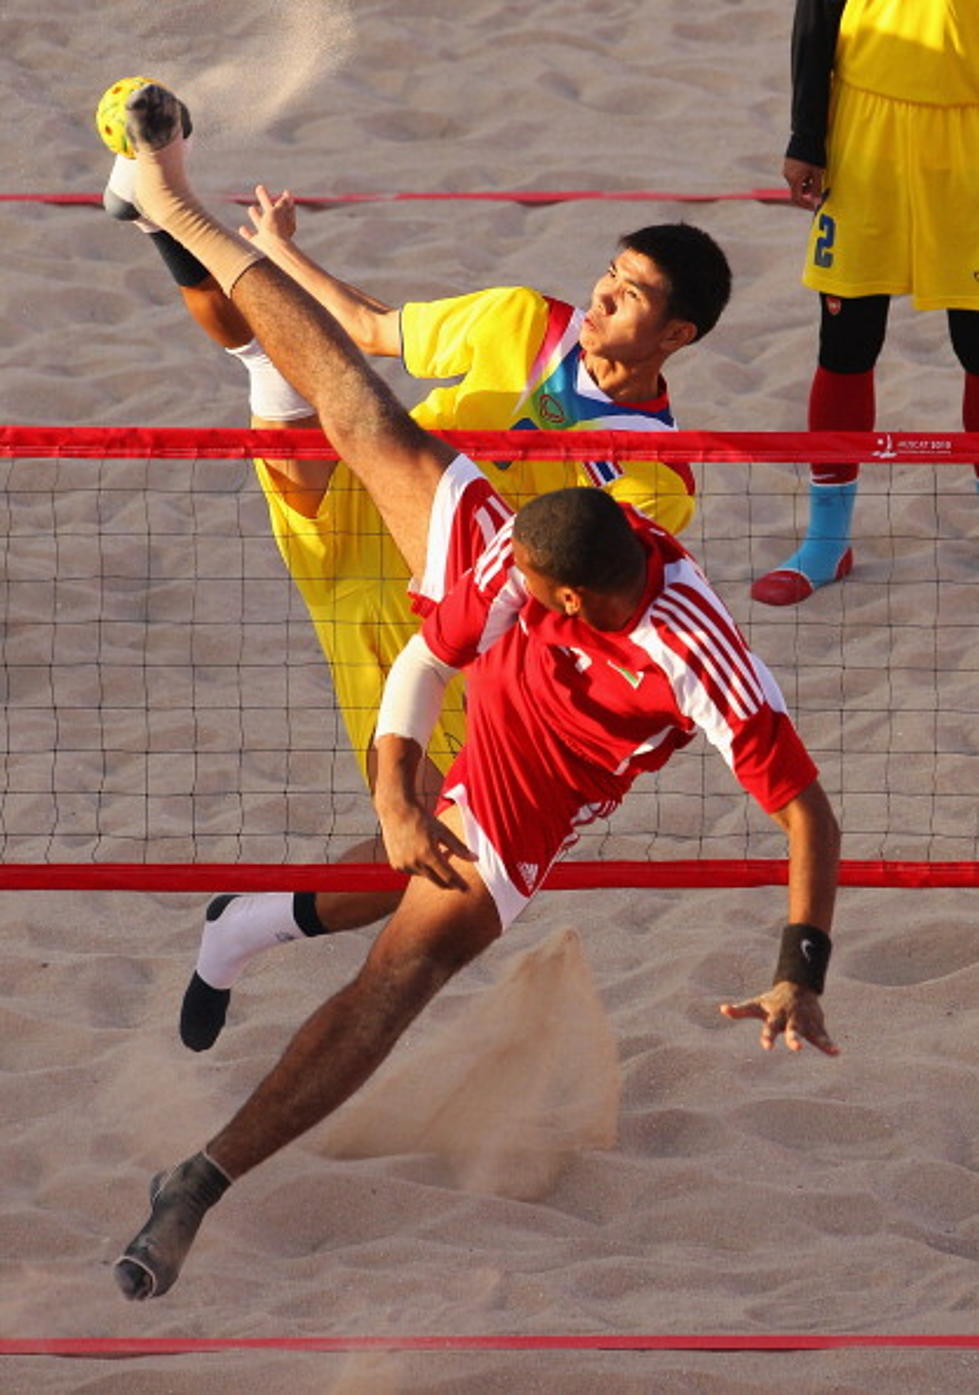 Pic Of The Day &#8211; Beach Sepaktakraw